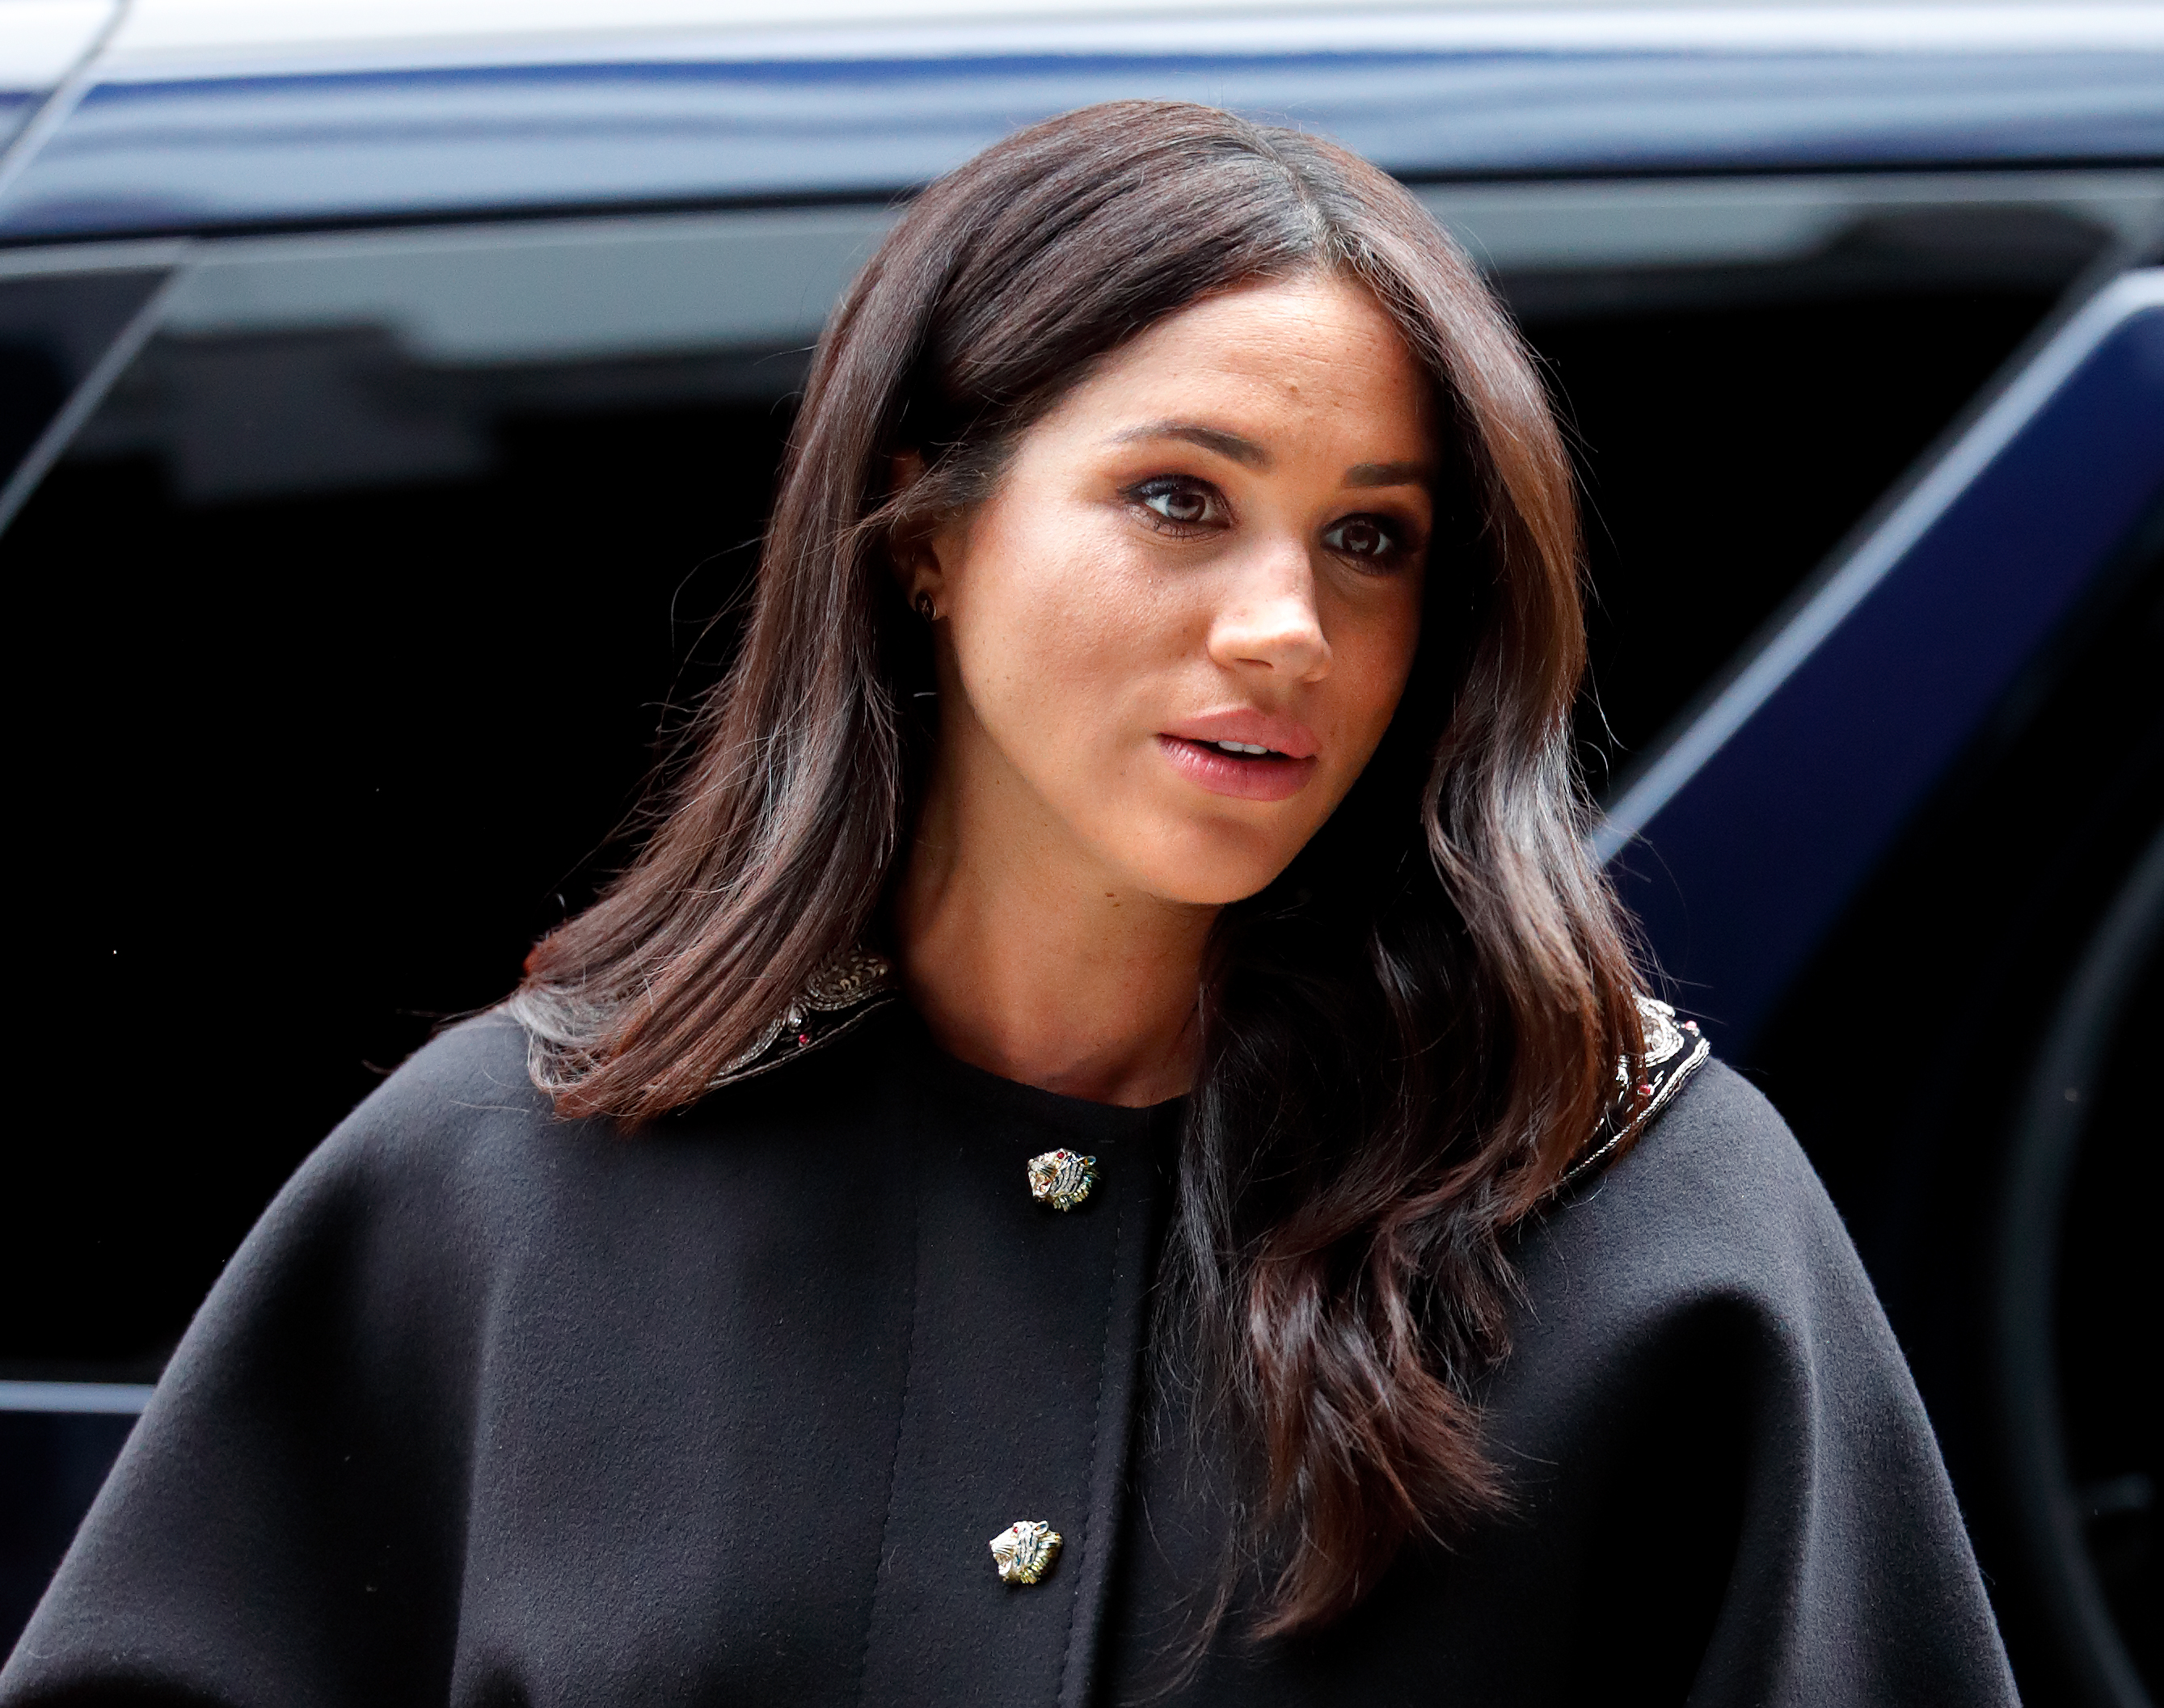 Meghan, Duchess of Sussex visits New Zealand House to sign a book of condolence on behalf of The Royal Family following the recent terror attack which saw at least 50 people killed at a Mosque in Christchurch on March 19, 2019 in London, England. | Source: Getty Images